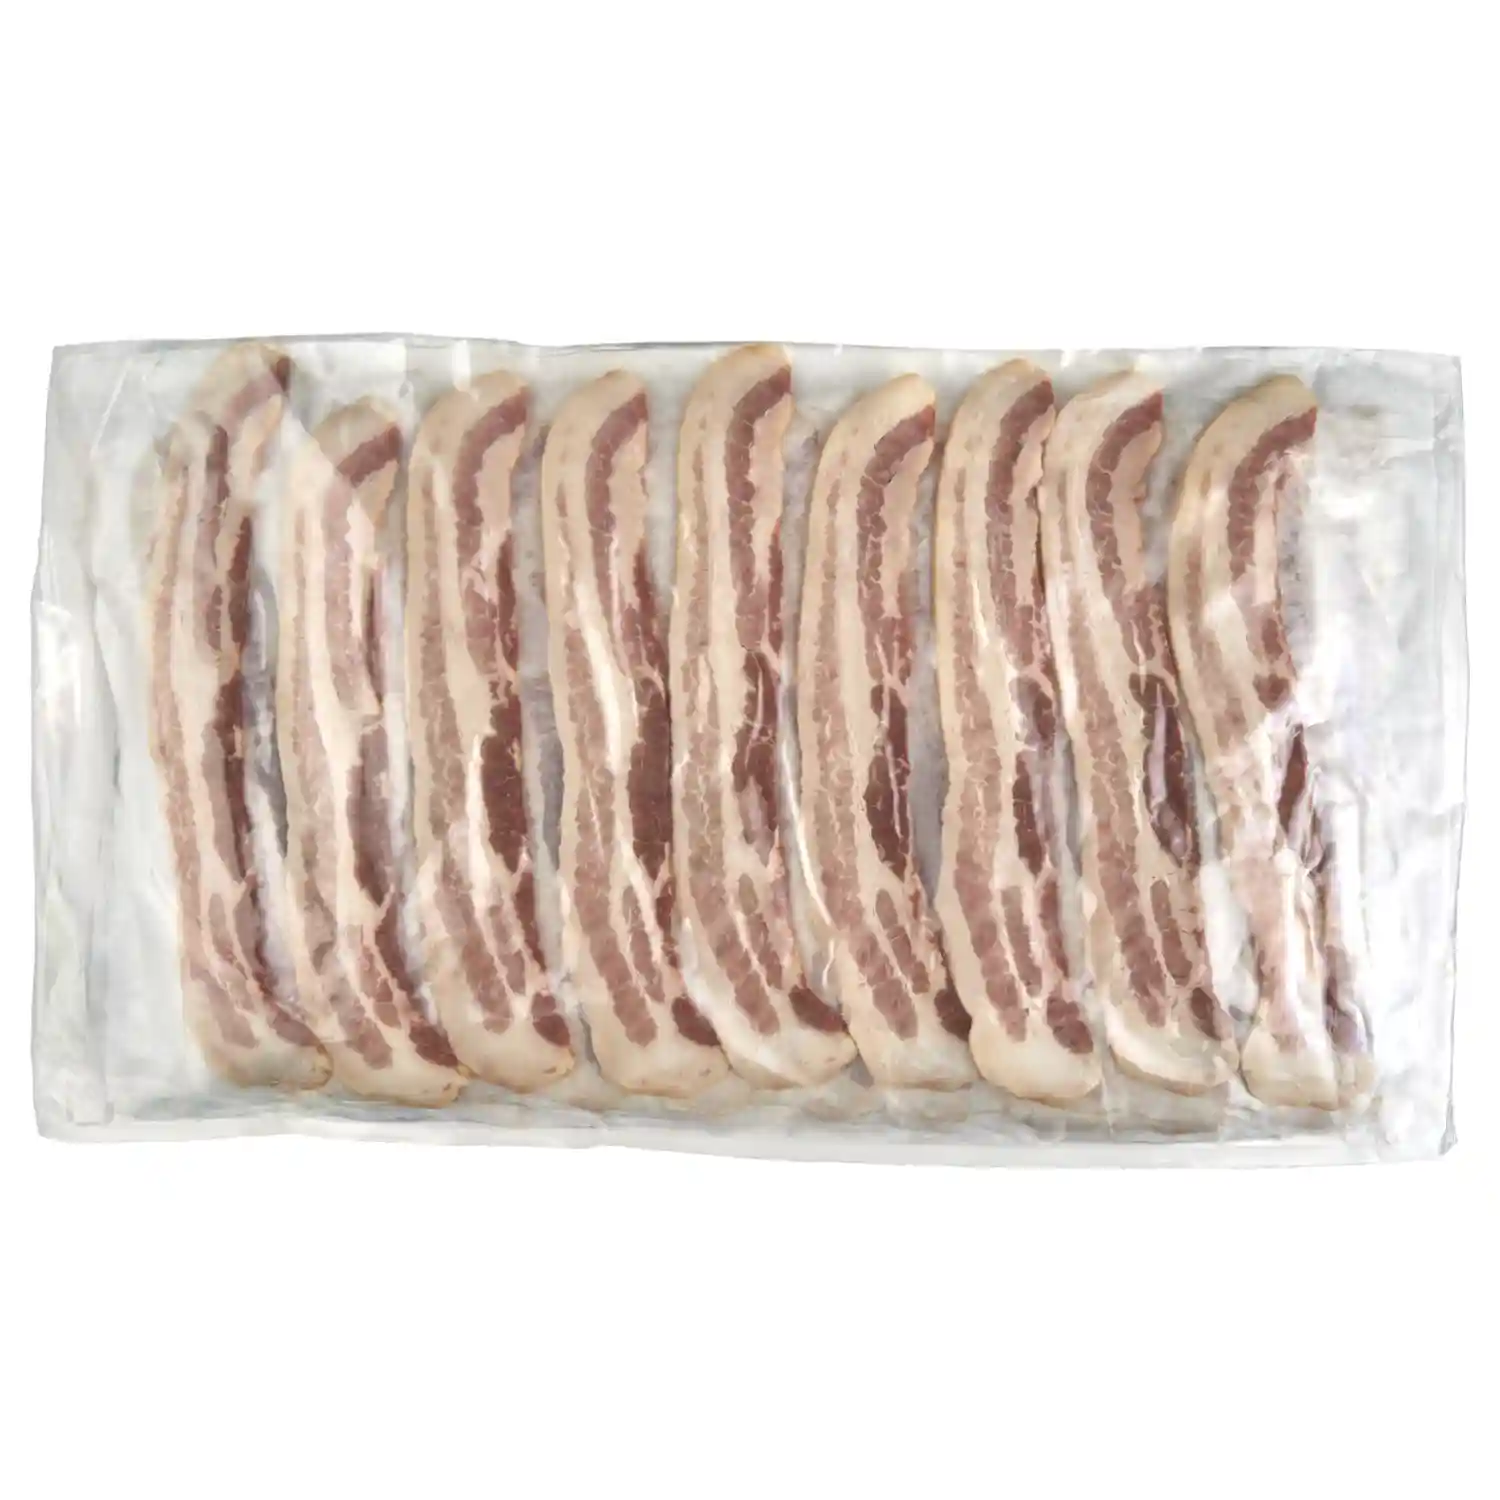 Wright® Brand Naturally Applewood Smoked Thin Sliced Bacon, Flat-Pack®, 15 Lbs, 18-22 Slices per Pound, Gas Flushed_image_21